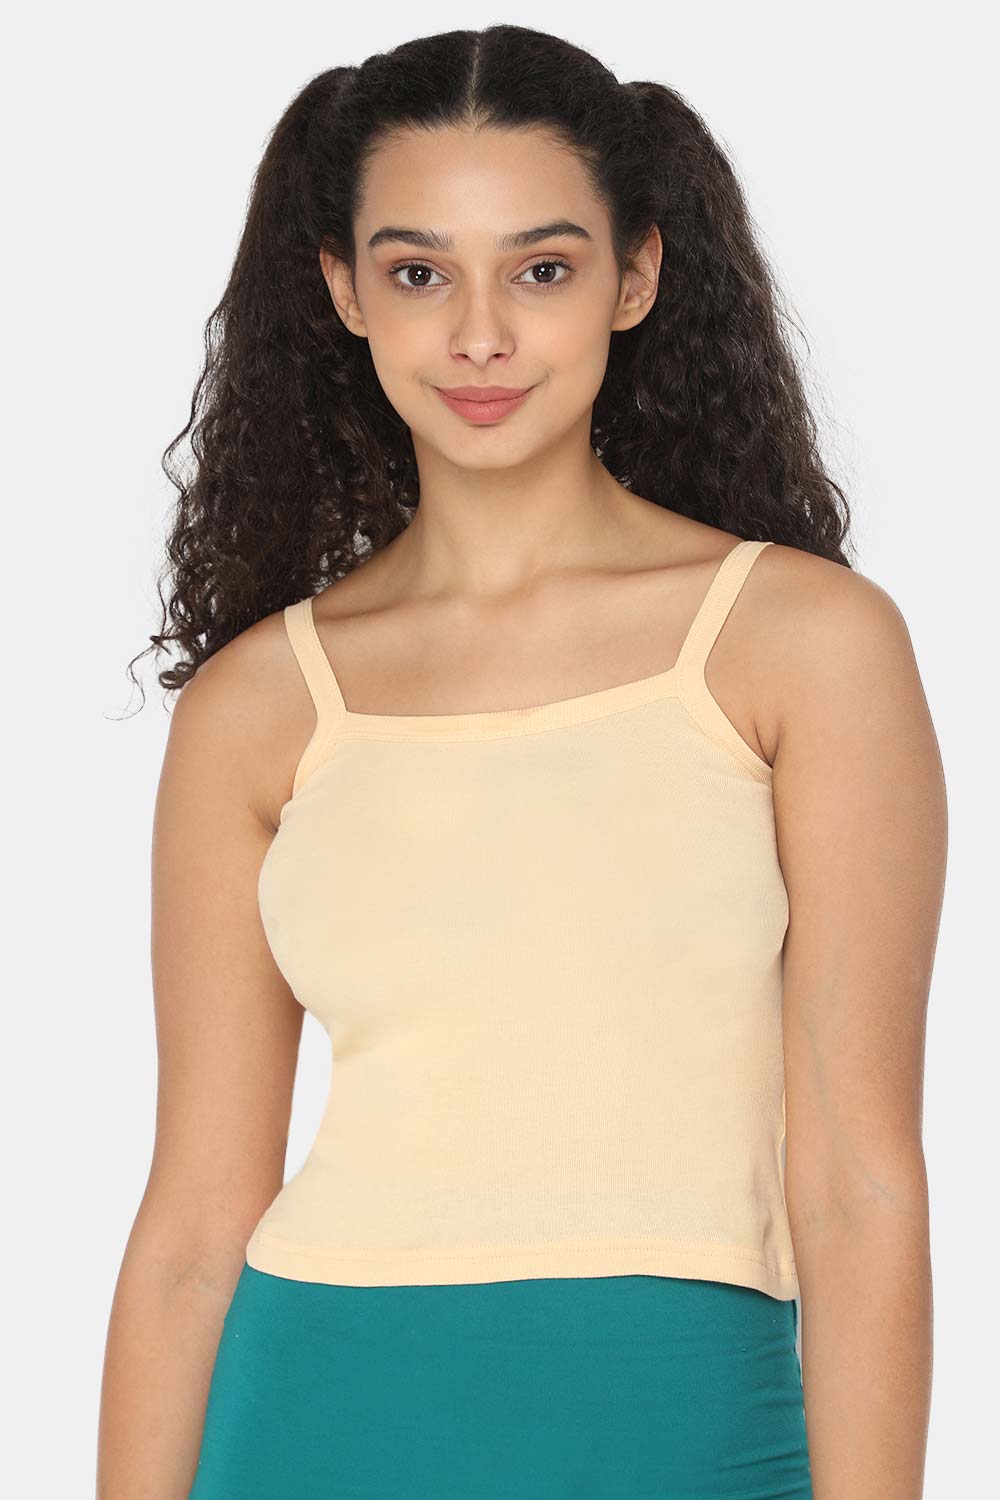 Intimacy Camisole-Slip Special Combo Pack - In01 - Pack of 2 - C01